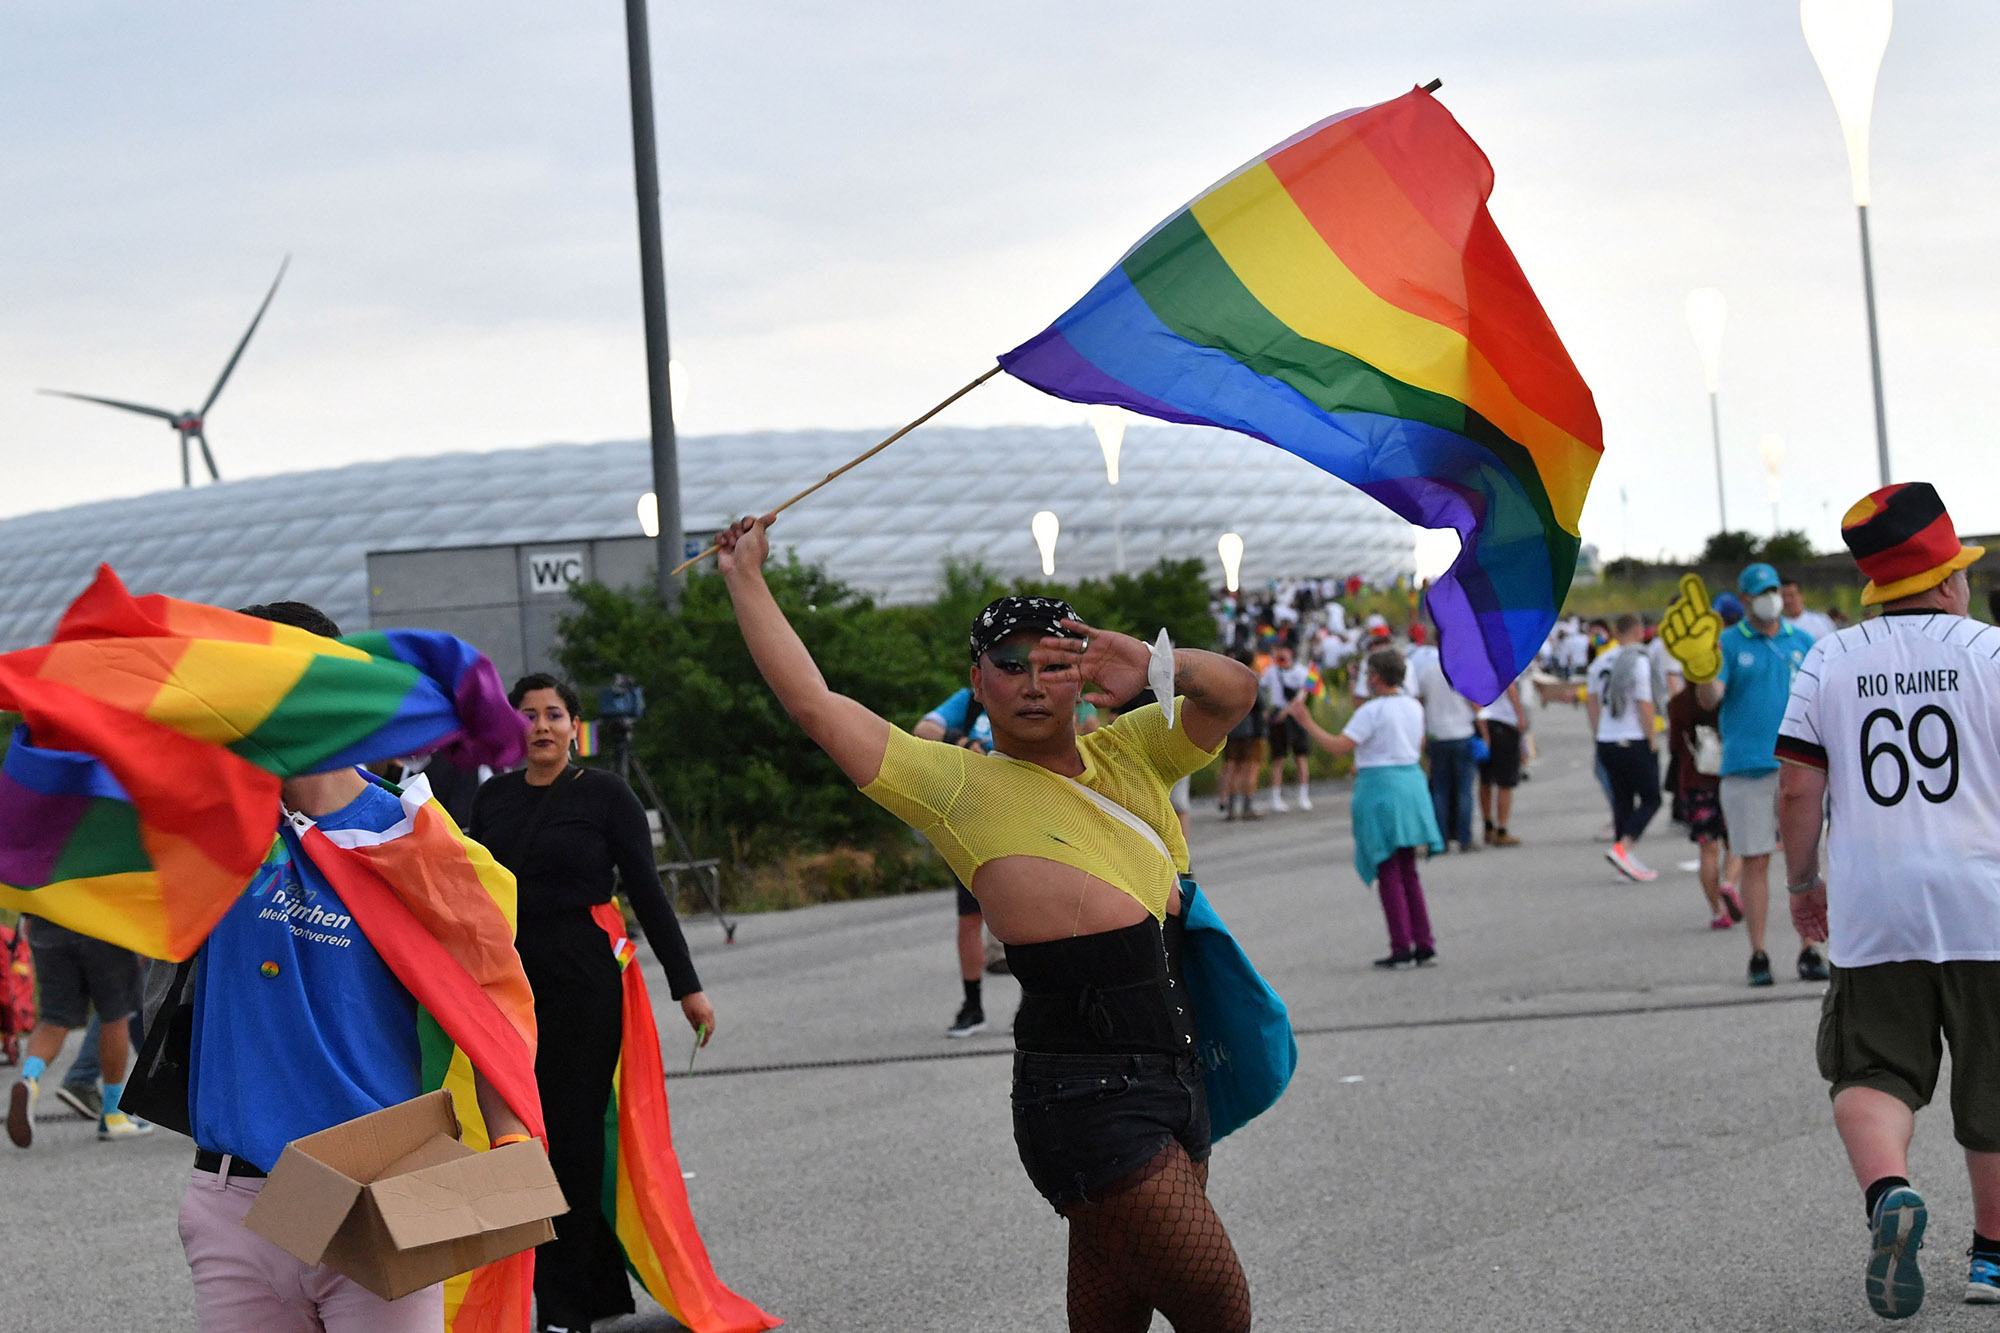 Germany fans wave Rainbow flags outside the Allianz Arena ahead of match Germany and Hungary, in Munich, on June 23.